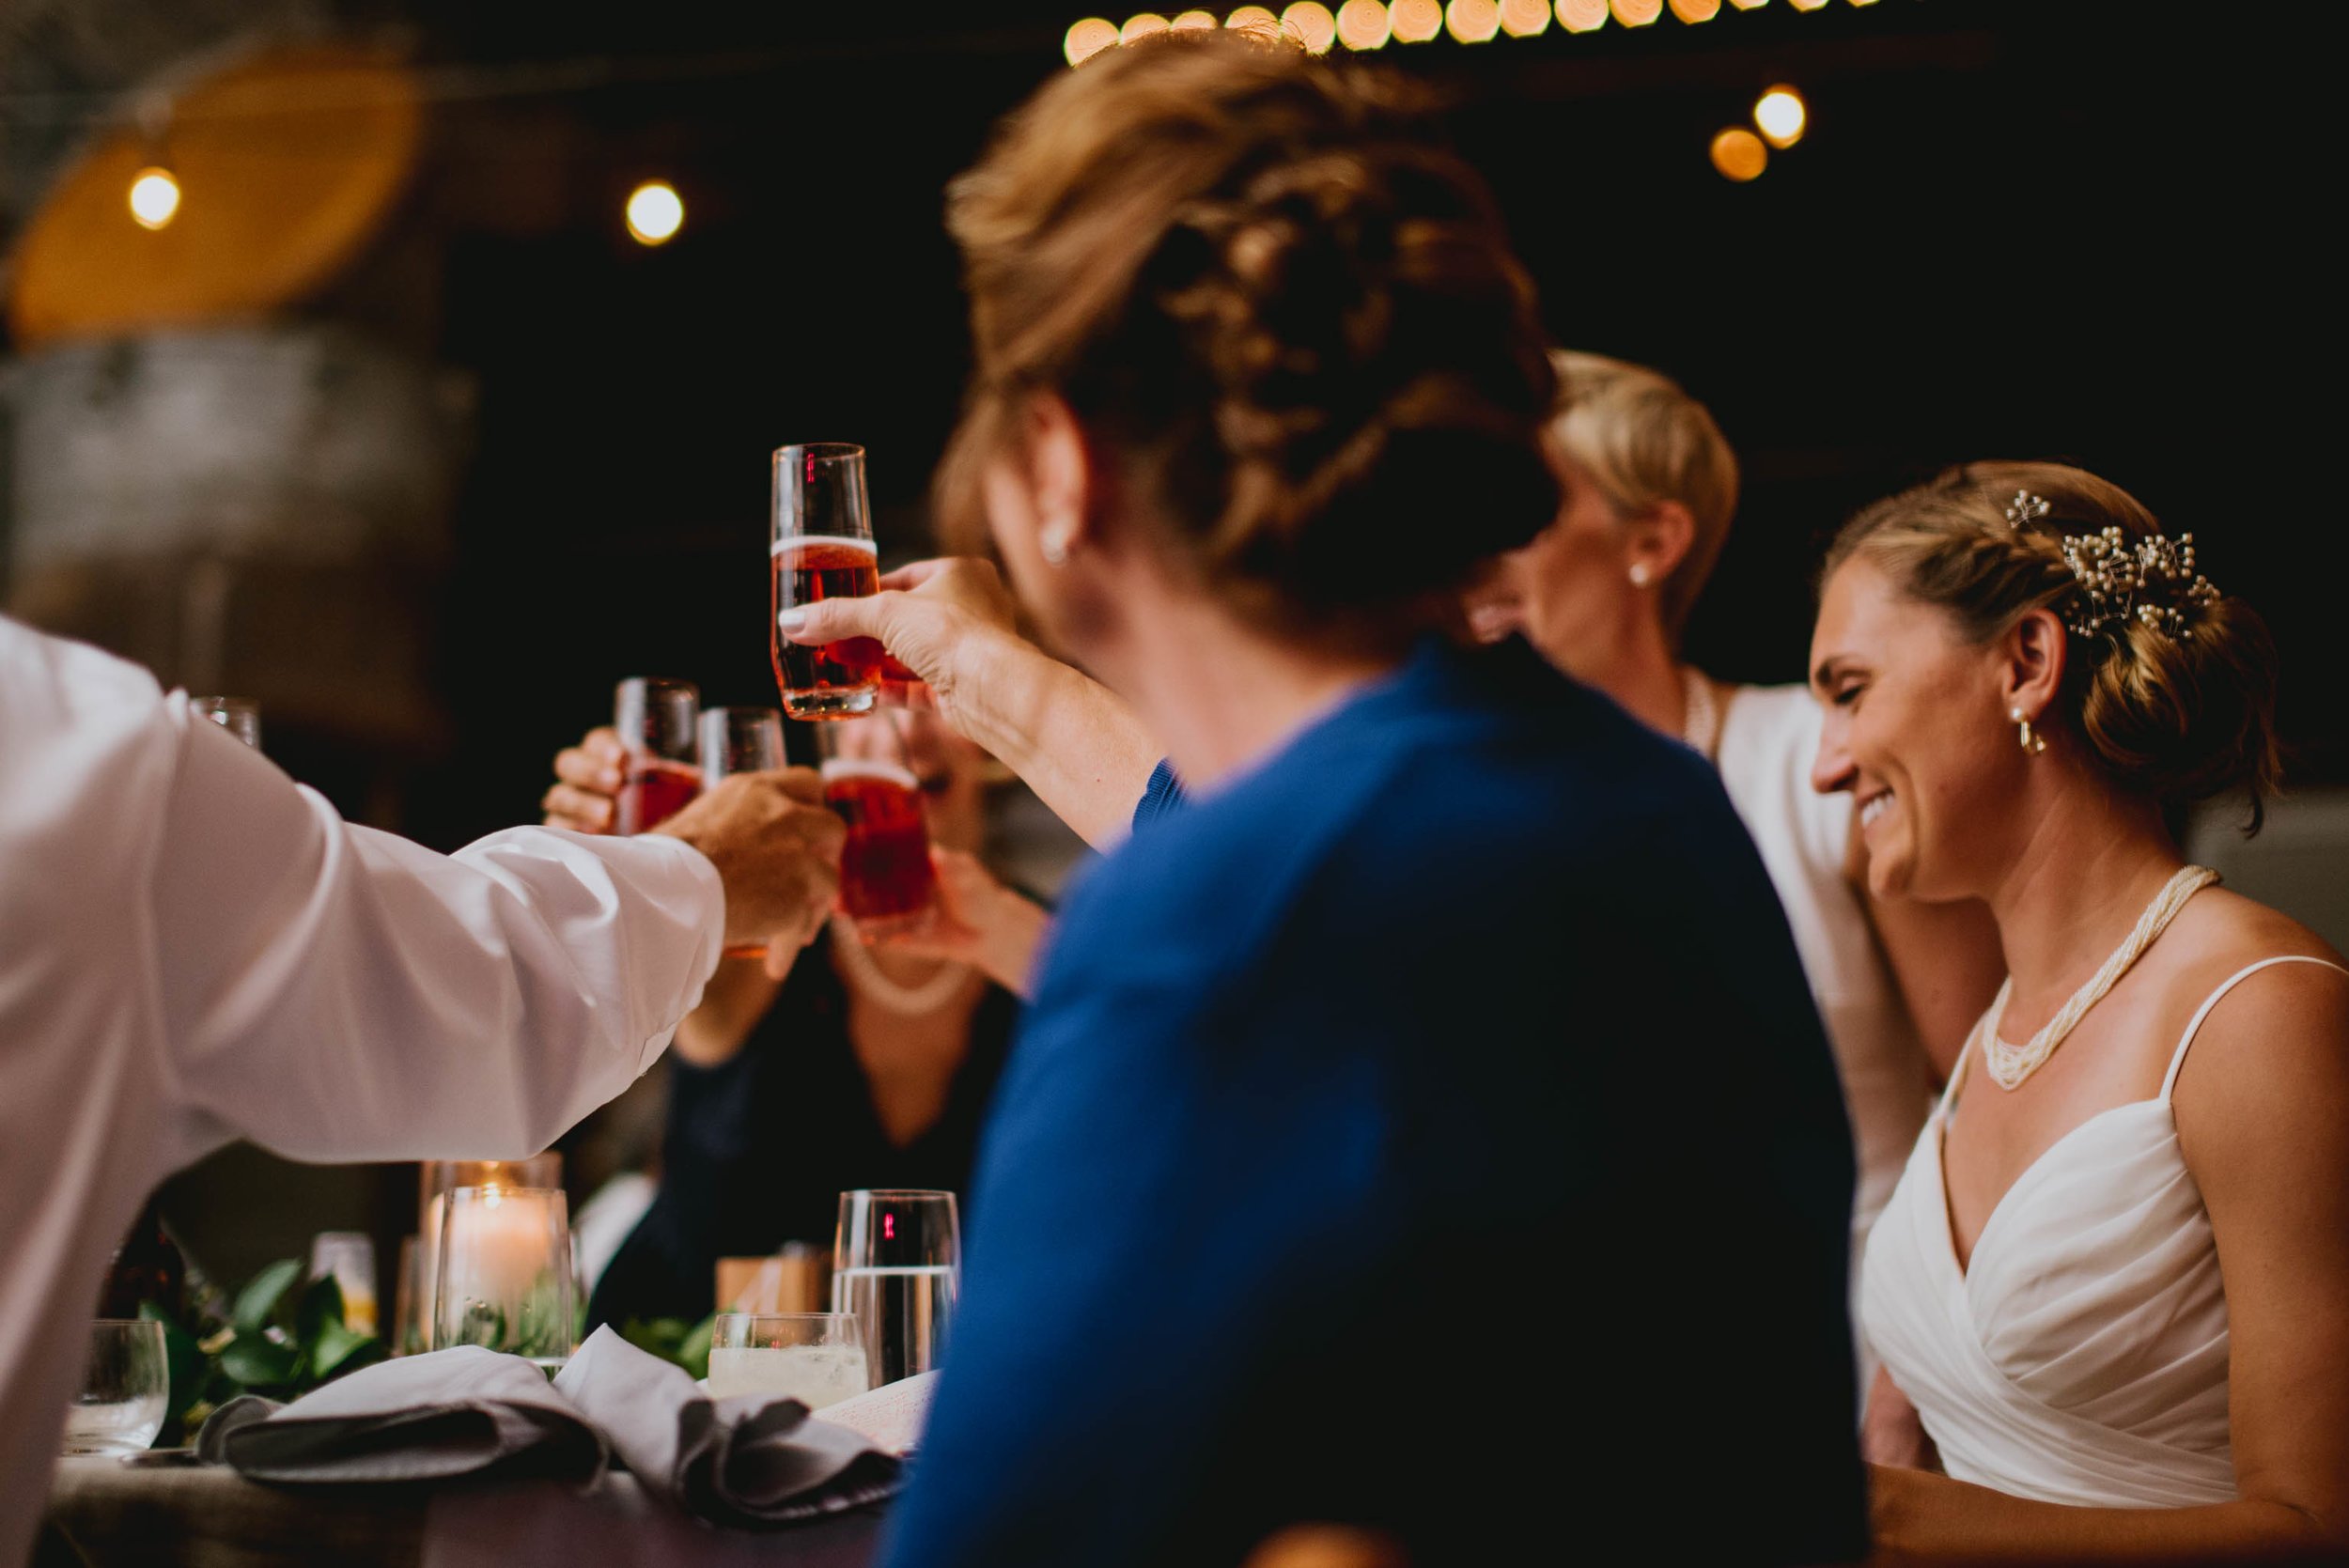 head table sharing in a toast during the wedding reception at haw river ballroom